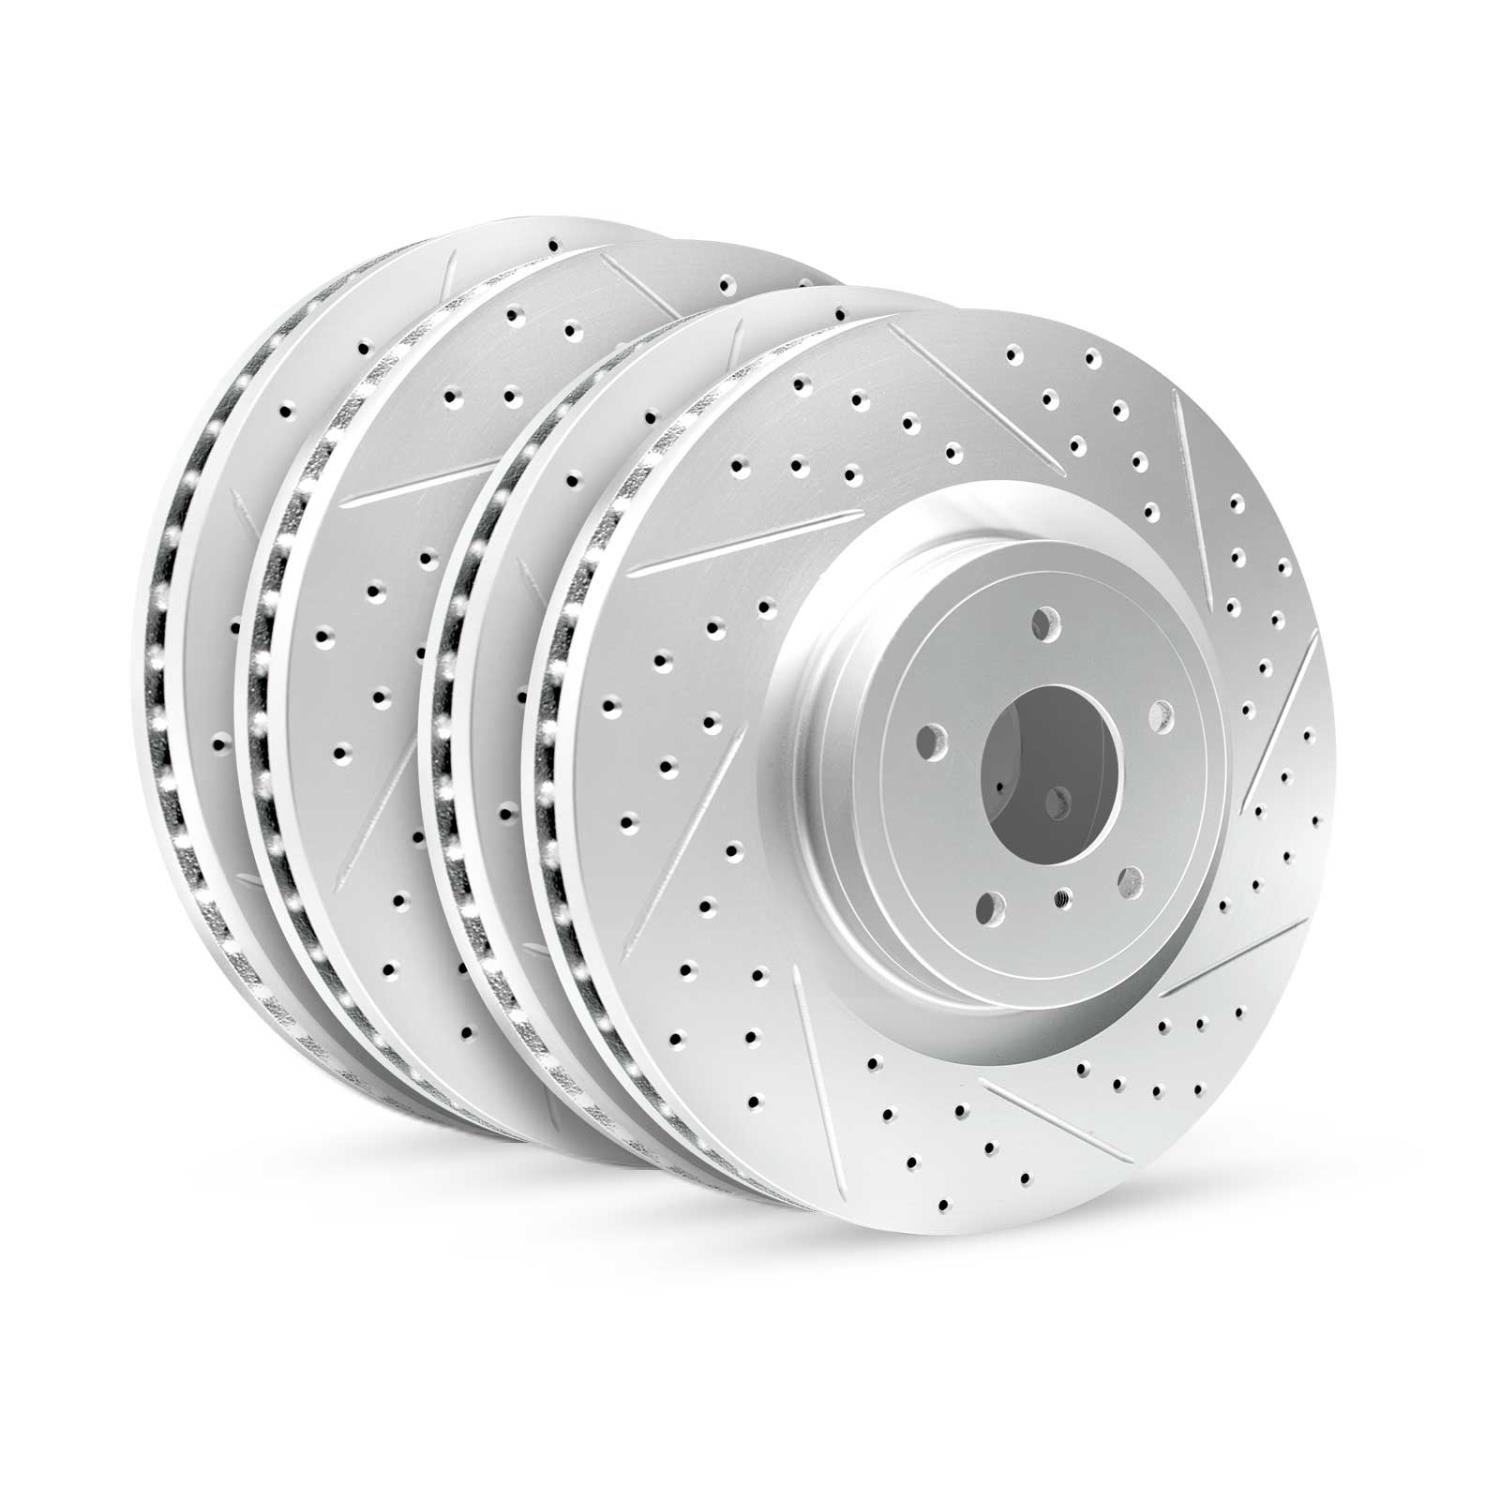 GEO-Carbon Drilled/Slotted Rotors, 2004-2006 Infiniti/Nissan, Position: Front/Rear